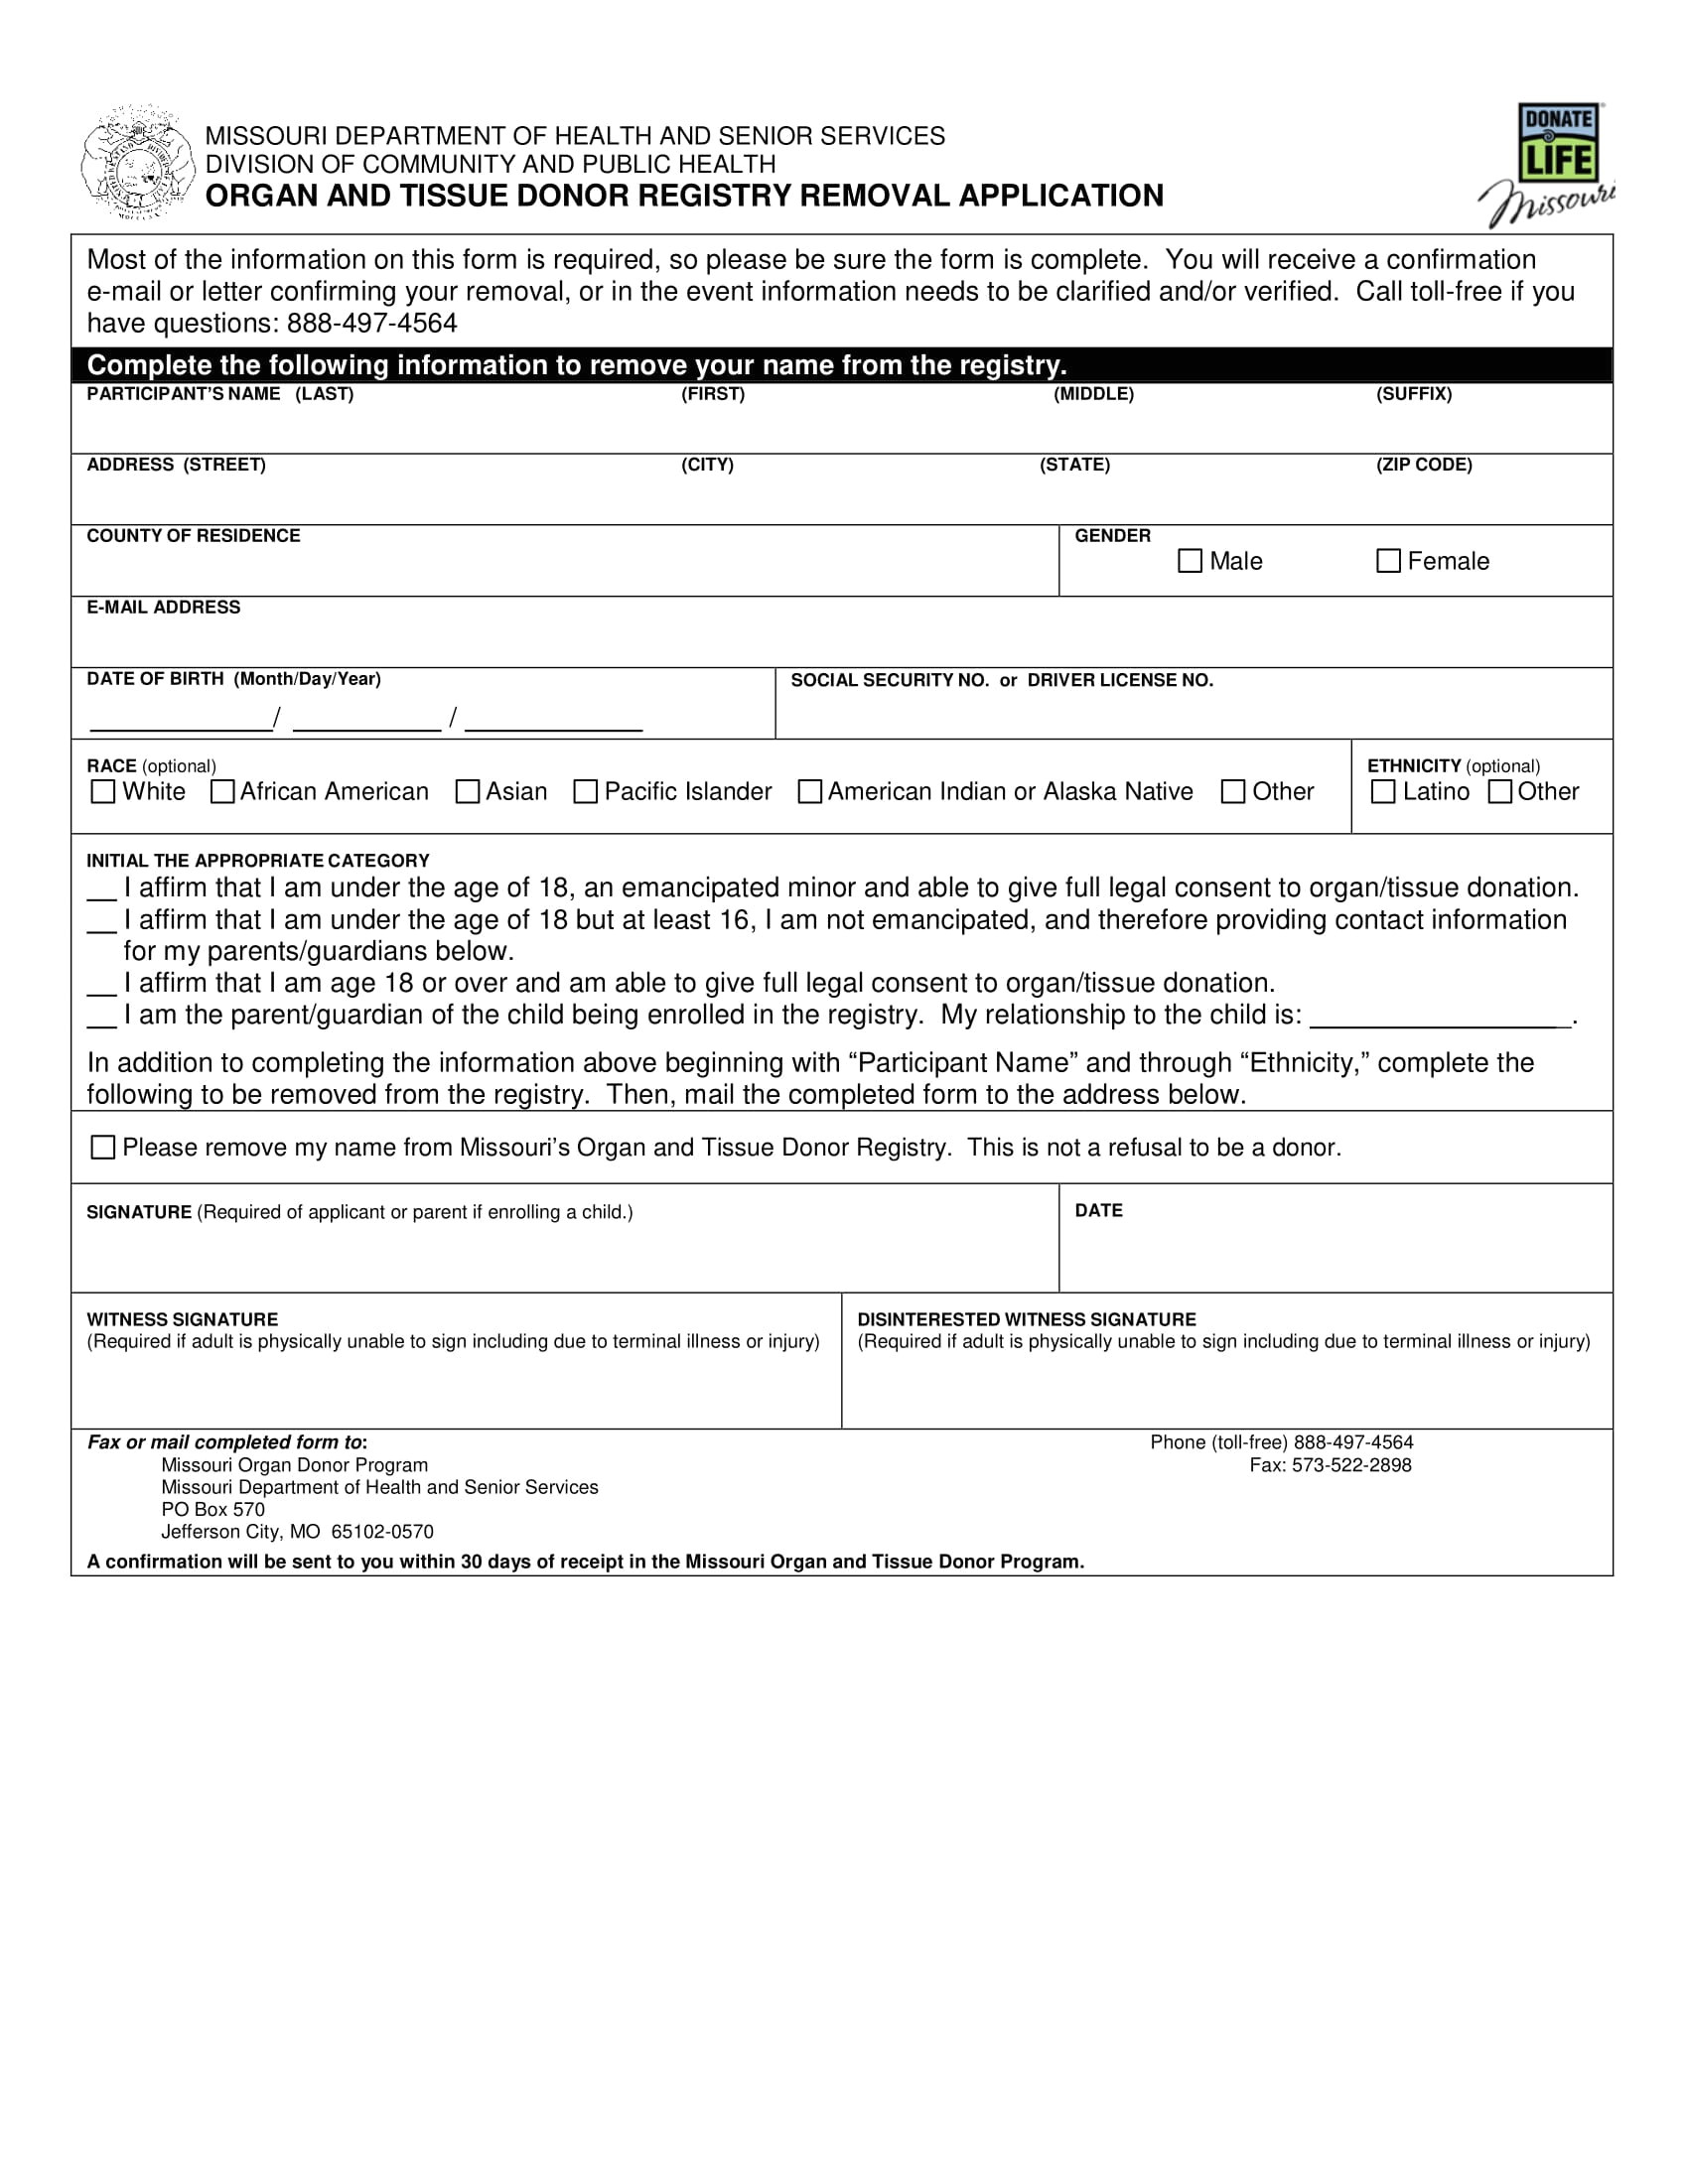 organ donor card template awesome refuse organ donation form pdf